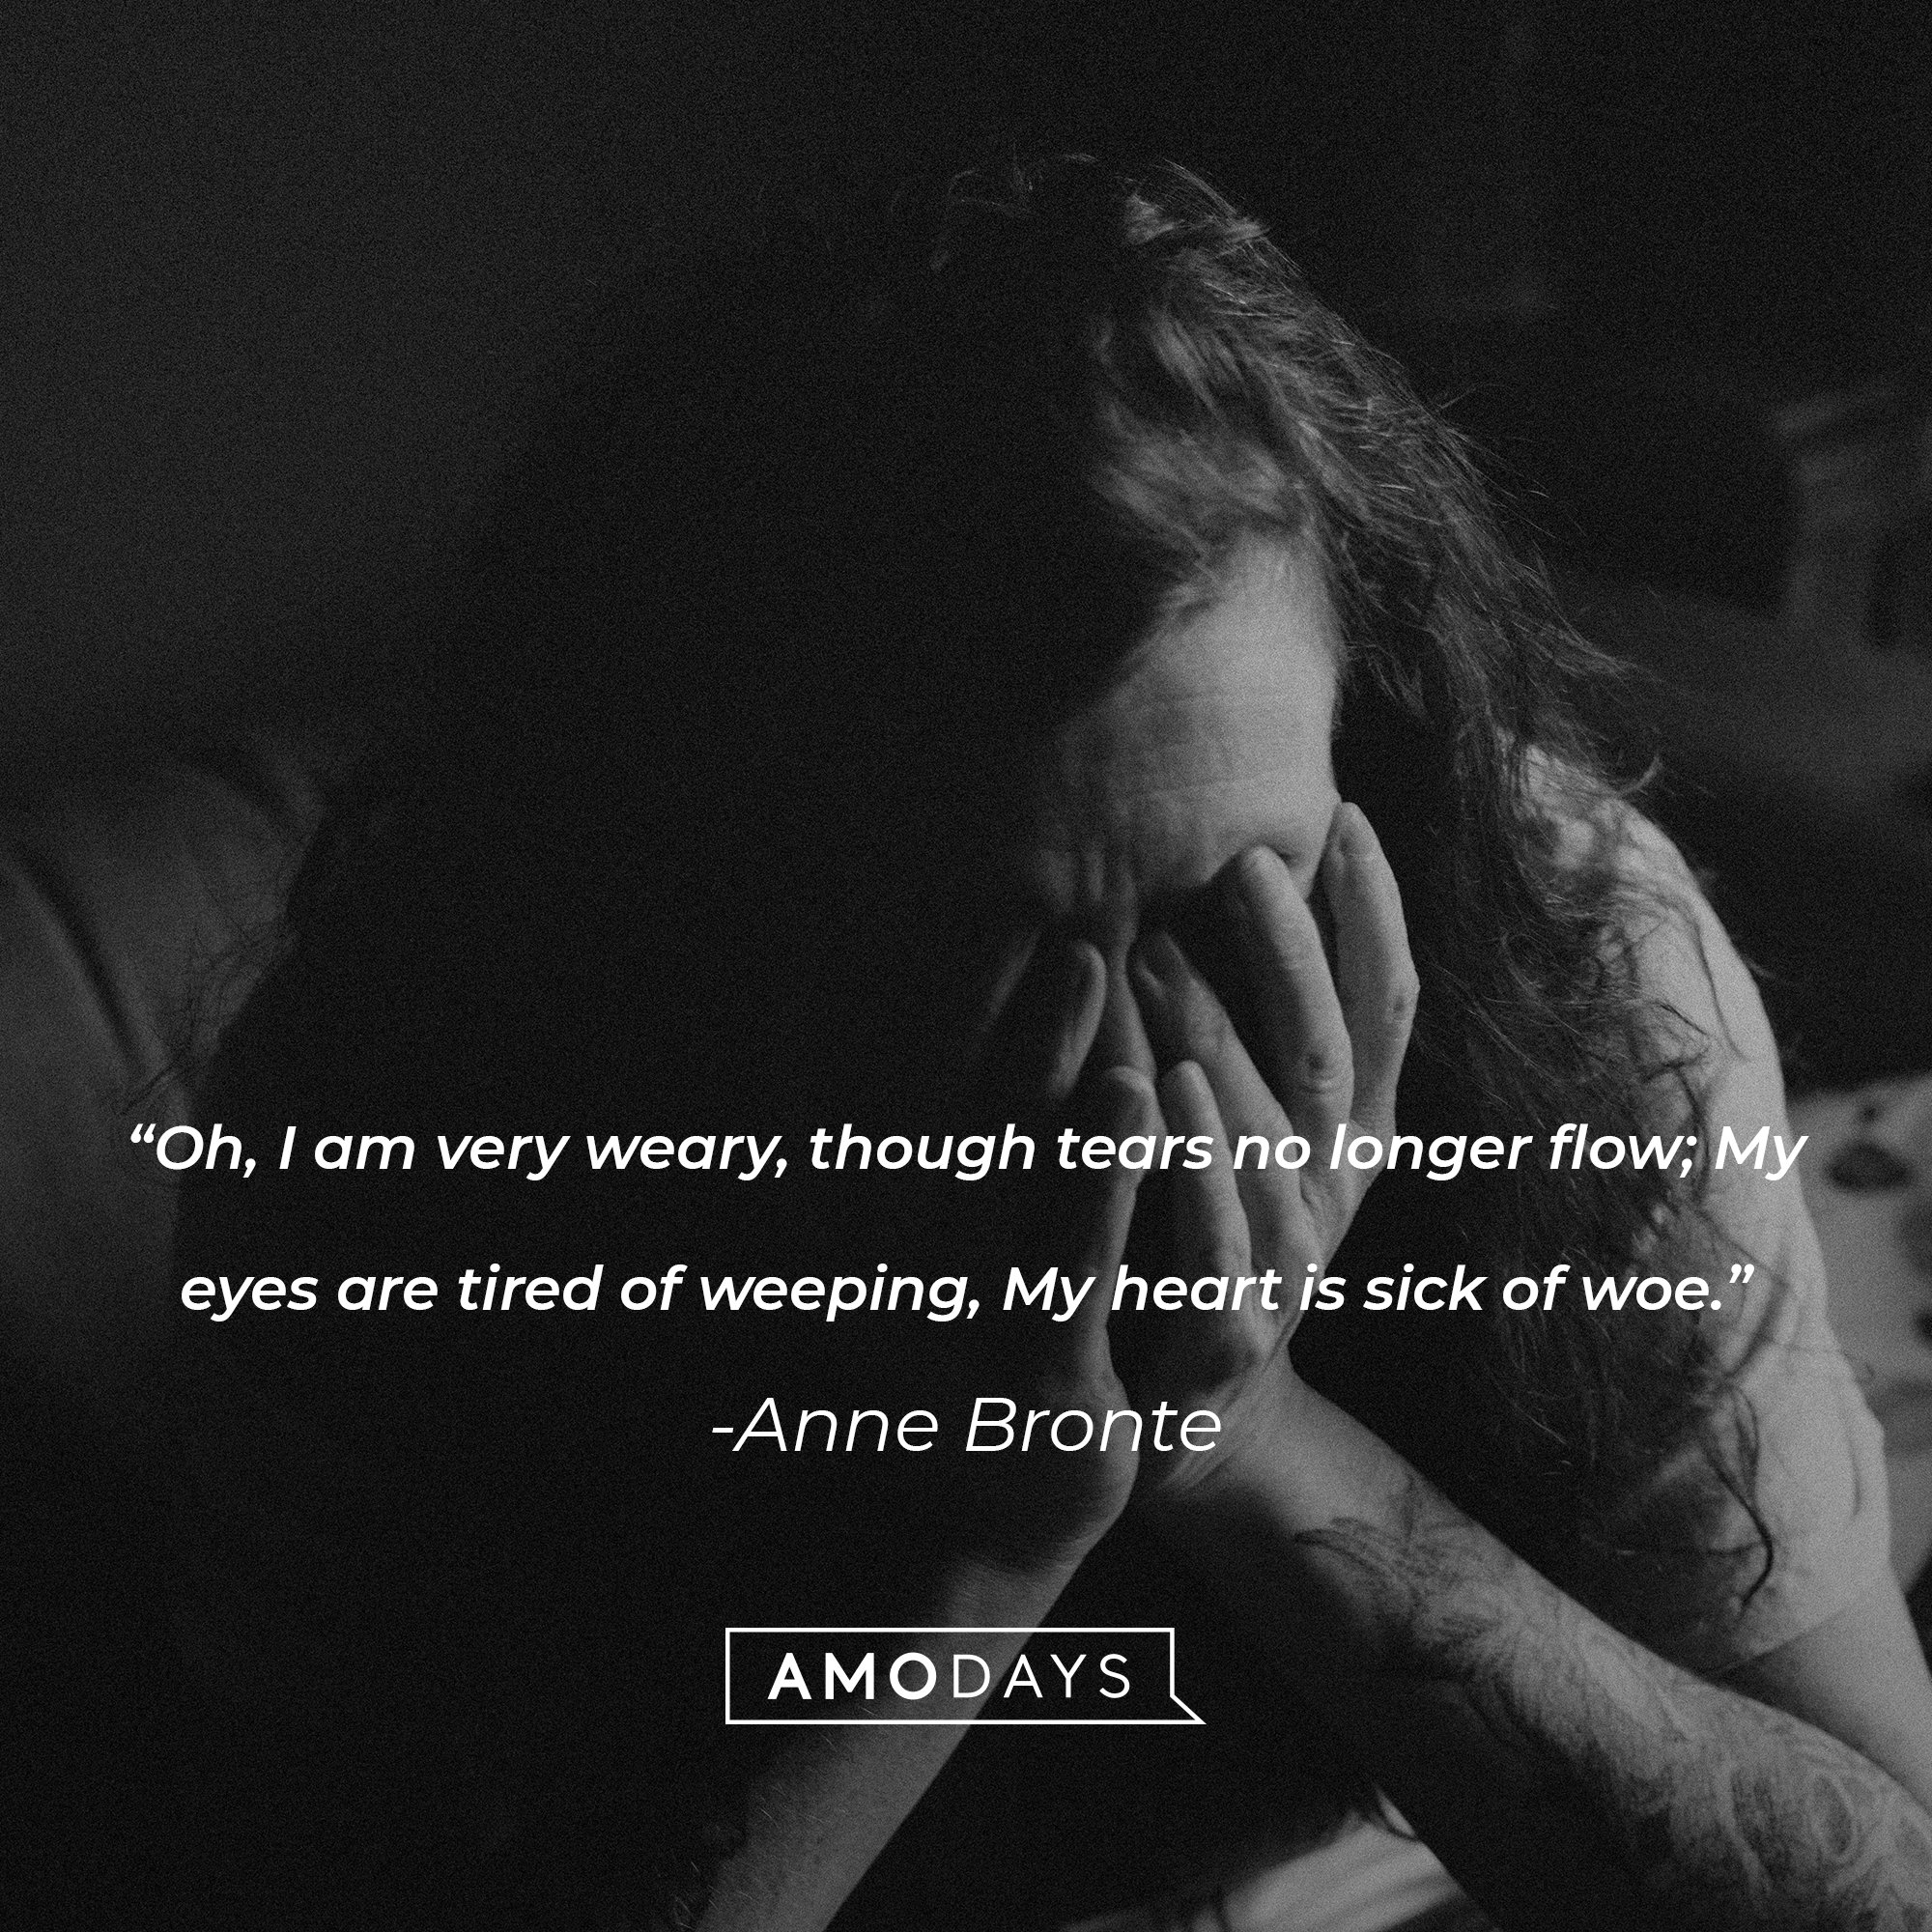 Anne Bronte's quote: "Oh, I am very weary, Though tears no longer flow; My eyes are tired of weeping, My heart is sick of woe." | Image: AmoDays